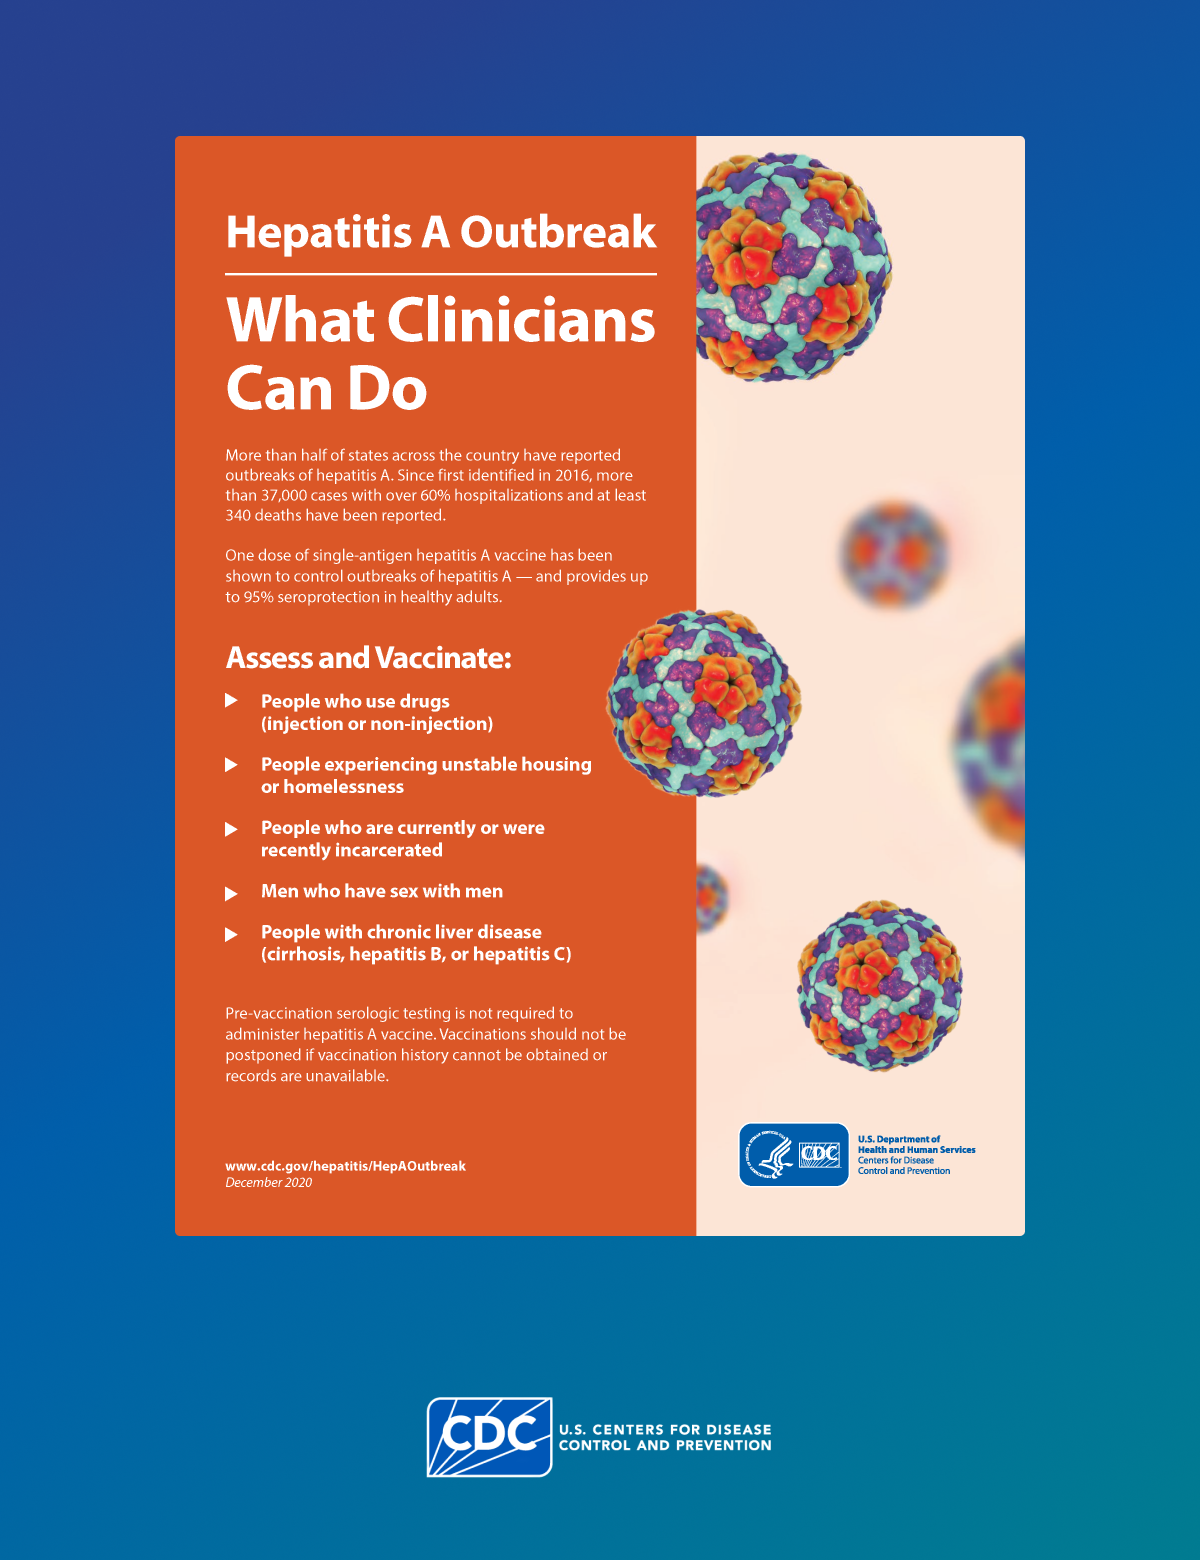 Fact sheet for clinicians to refer to during a hepatitis A outbreak